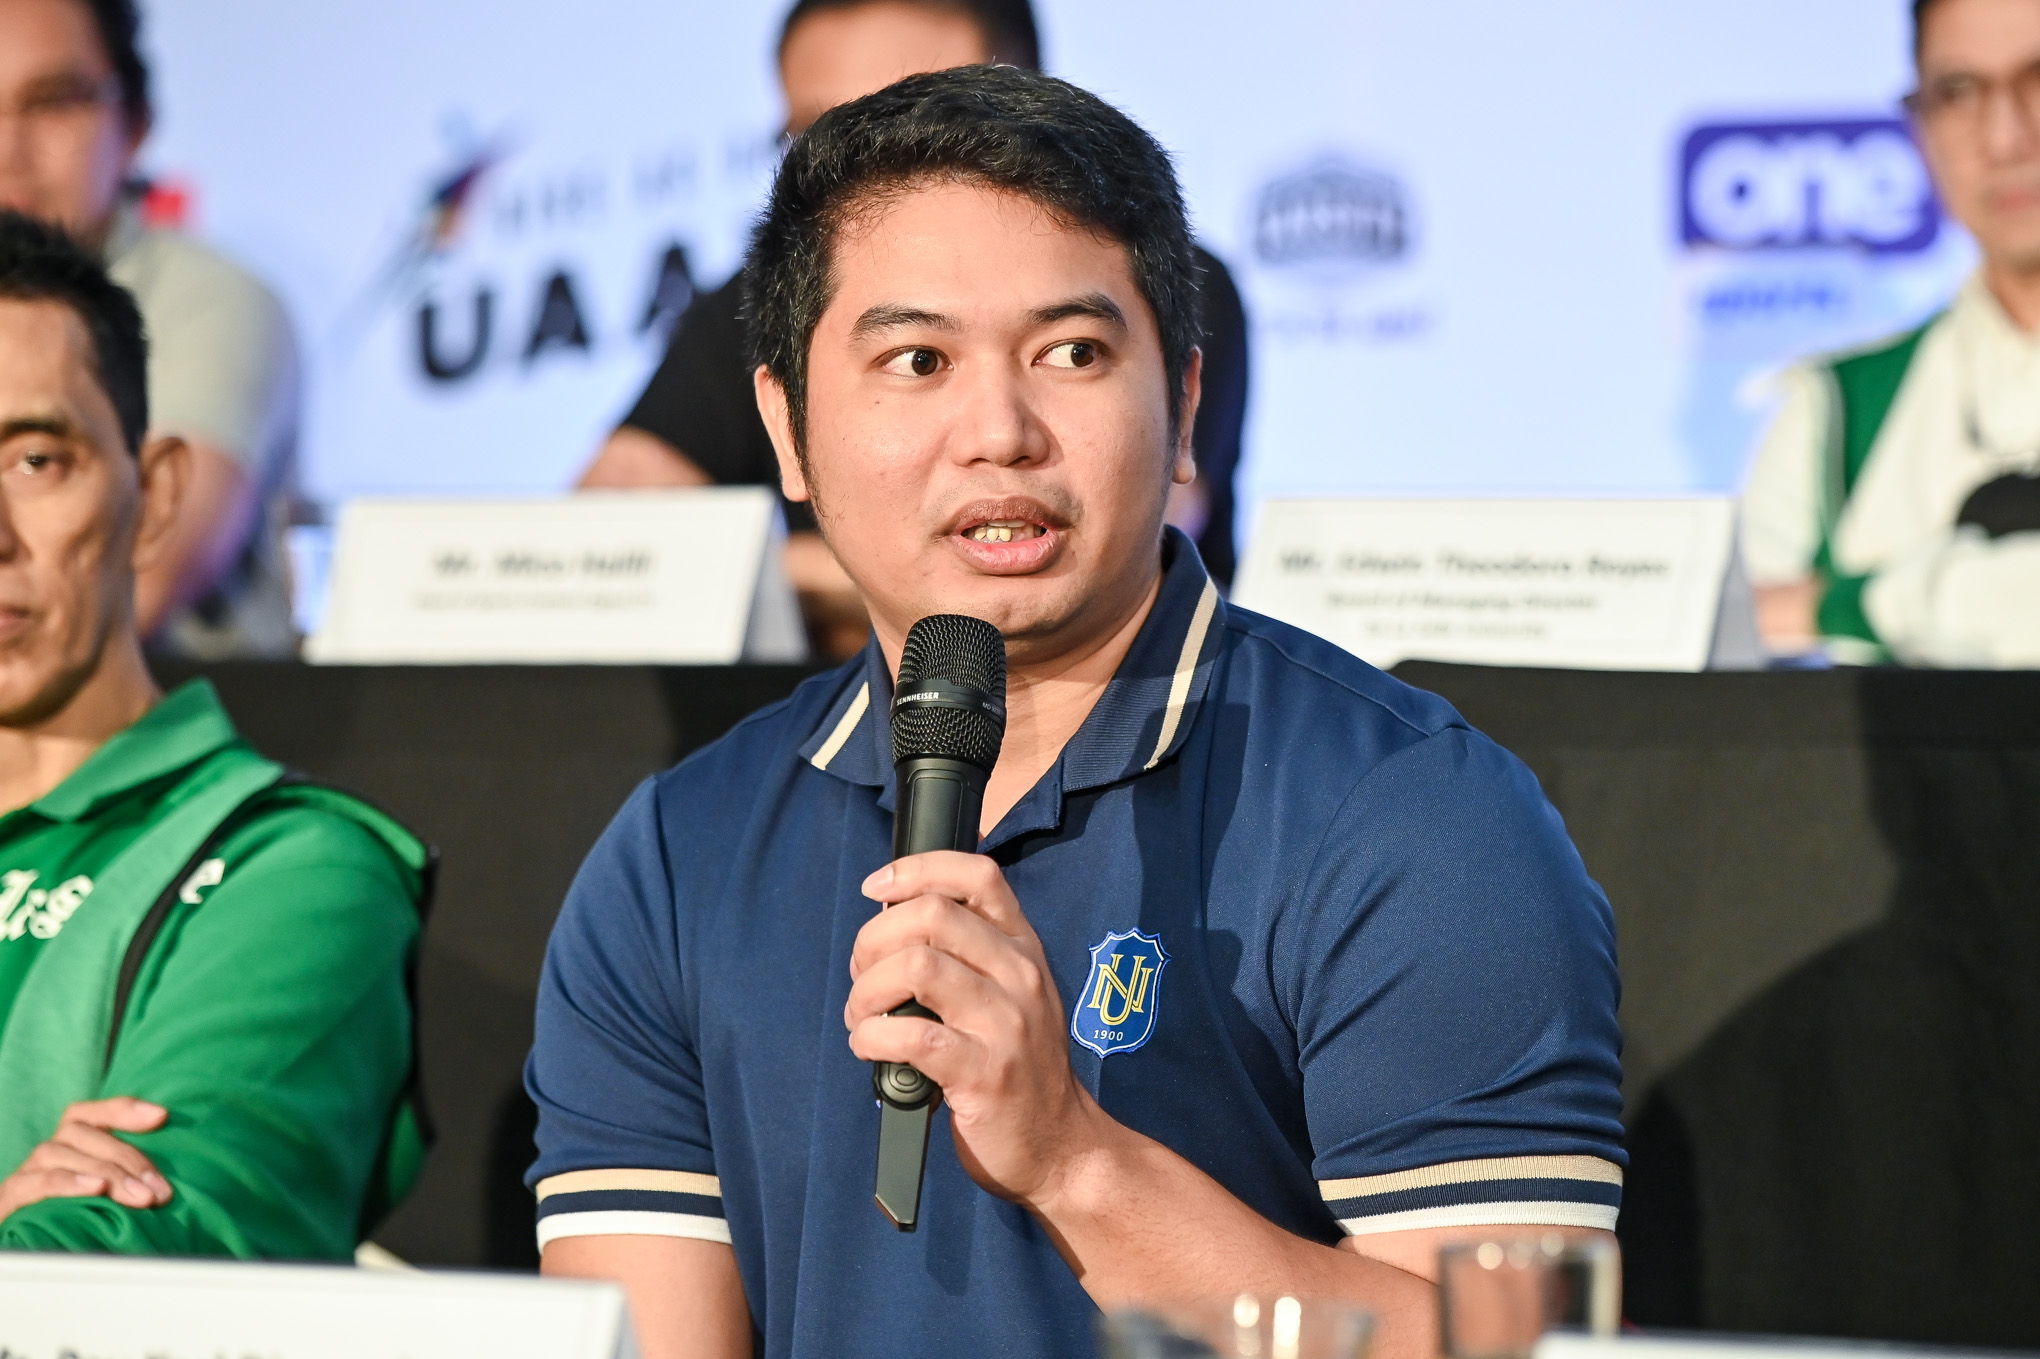 UAAP85-Coach-NU-Mr.-Ray-Karl-Dimaculangan-9551 Belen, NU believe title defense will be much tougher than UAAP 84 News NU UAAP Volleyball  - philippine sports news